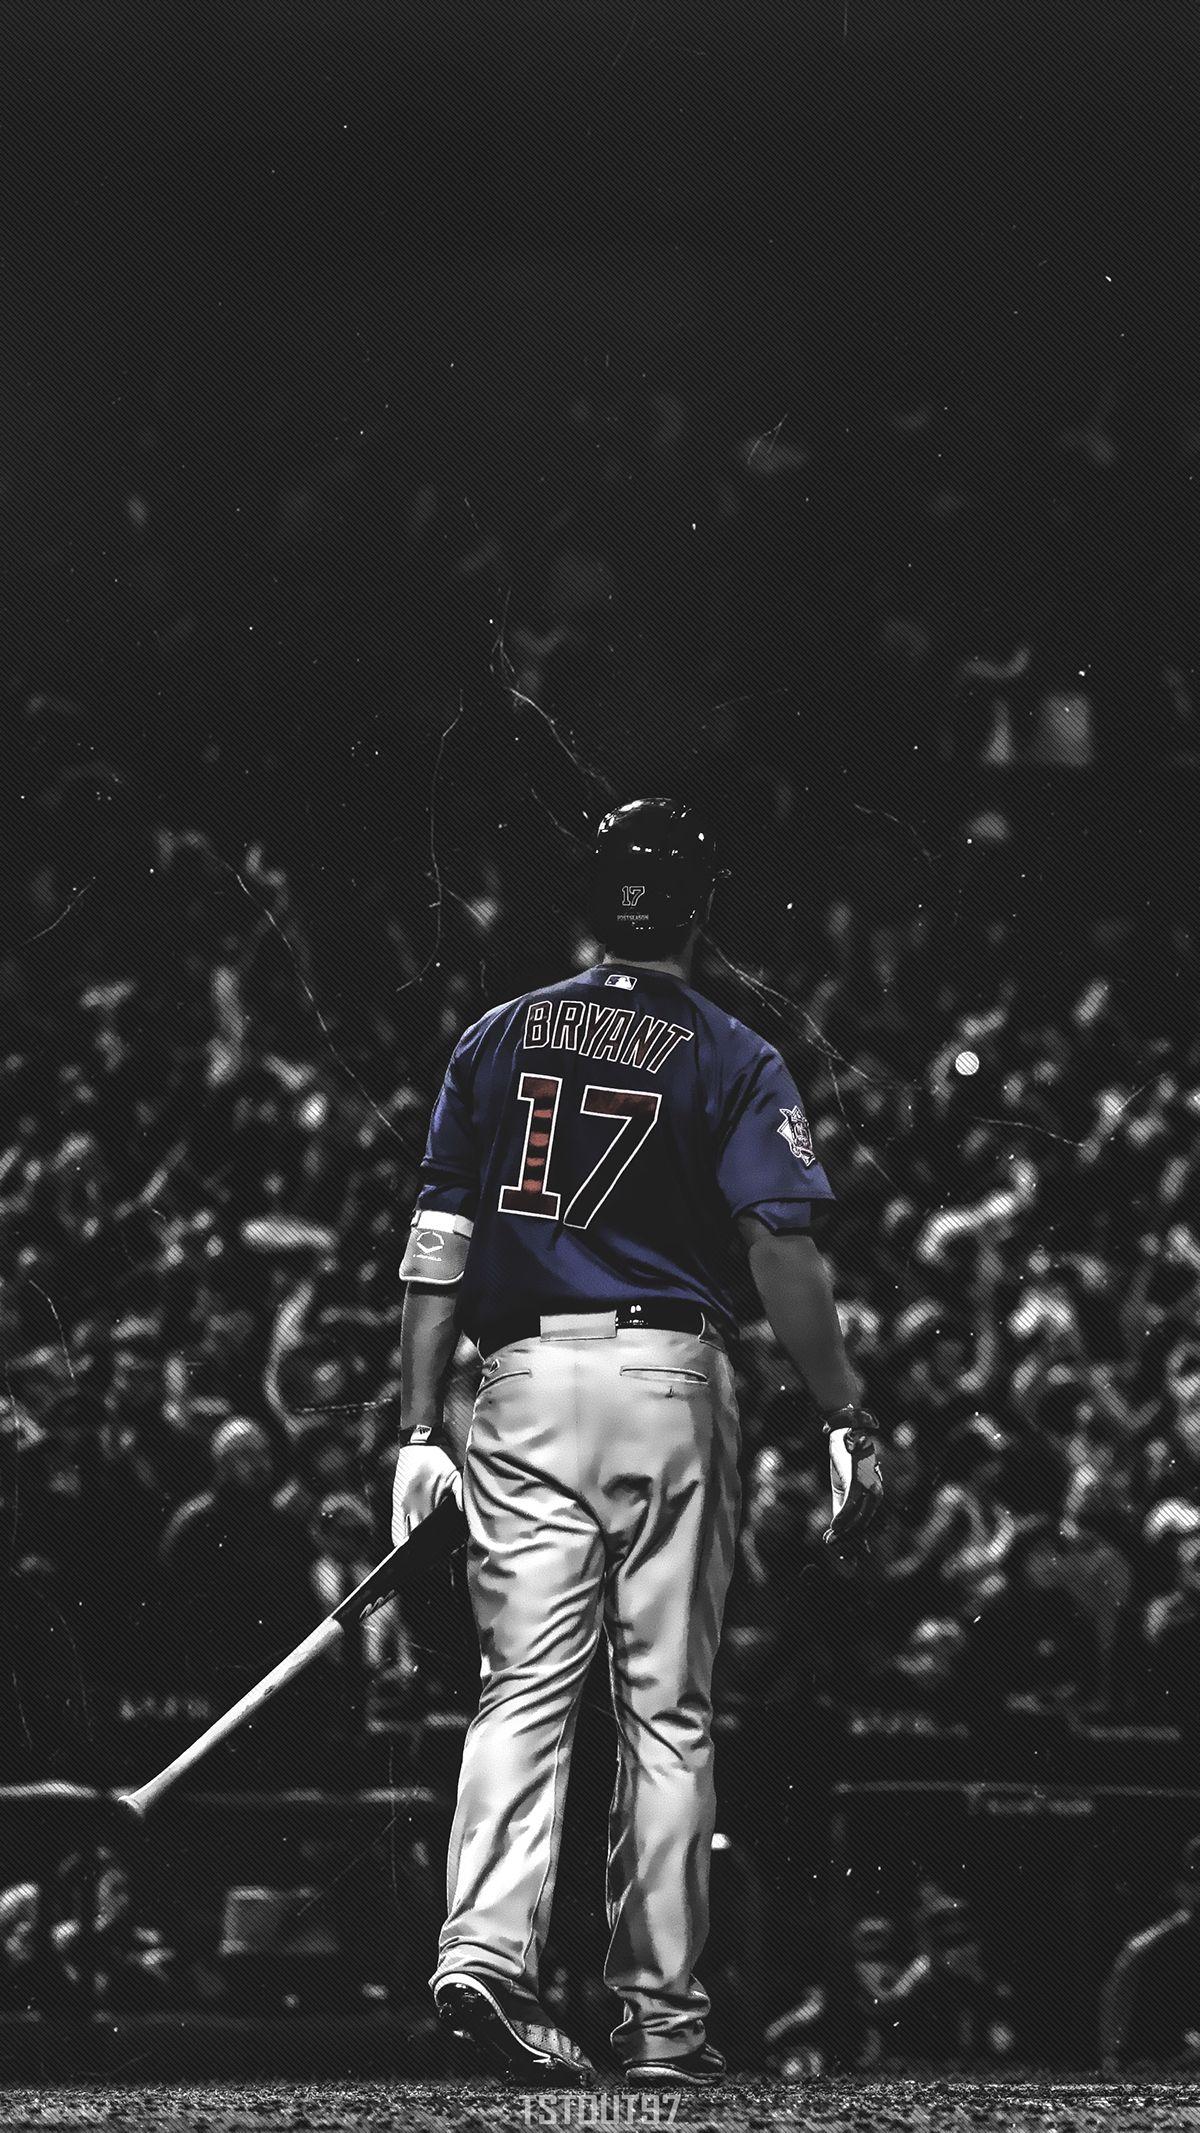 Kris Bryant Mobile Phone Wallpapers on Behance